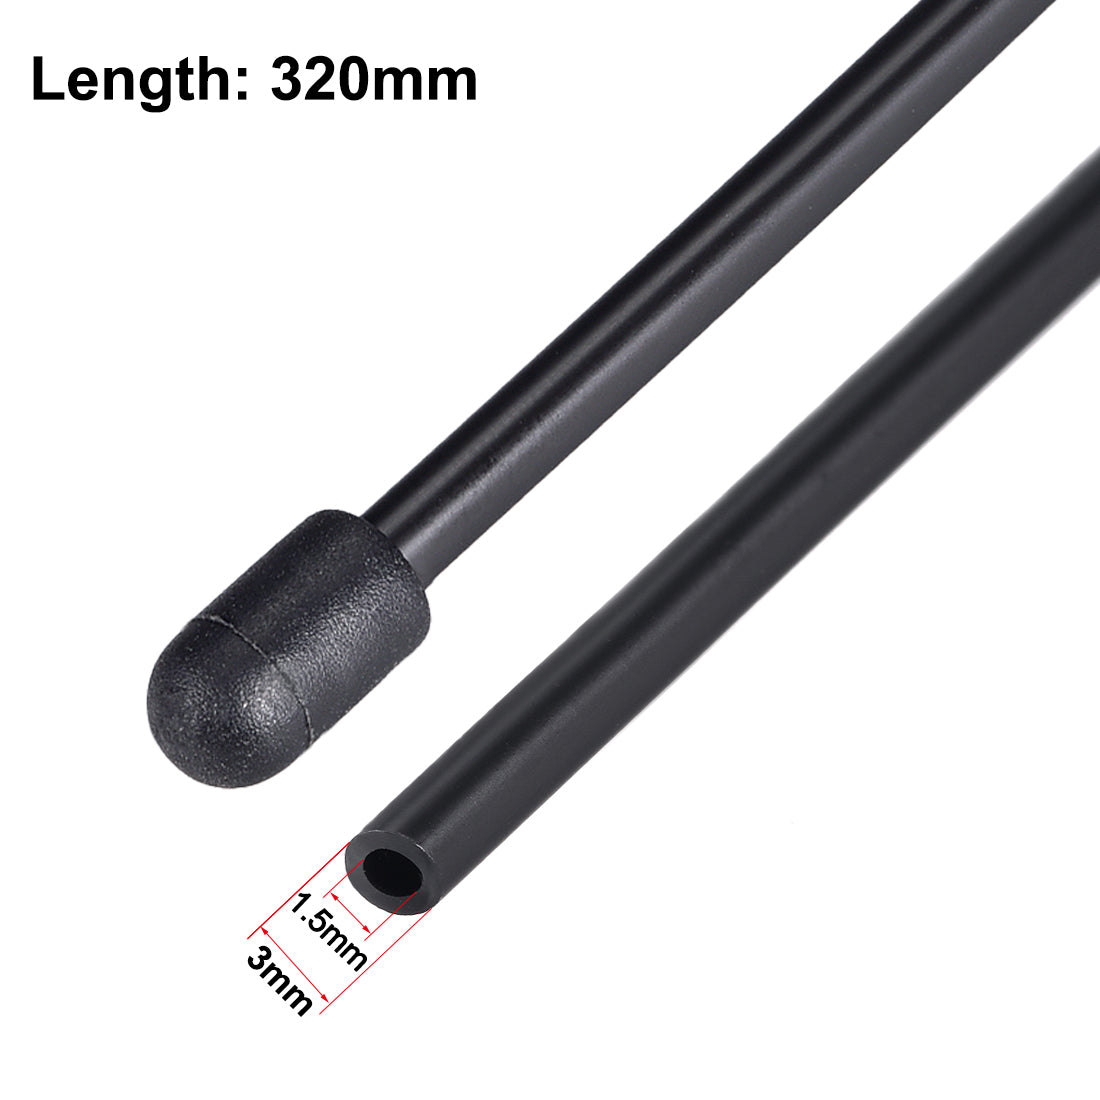 uxcell Uxcell RC Antenna Tube with Cap for RC Boat, Plastic Black 5pcs